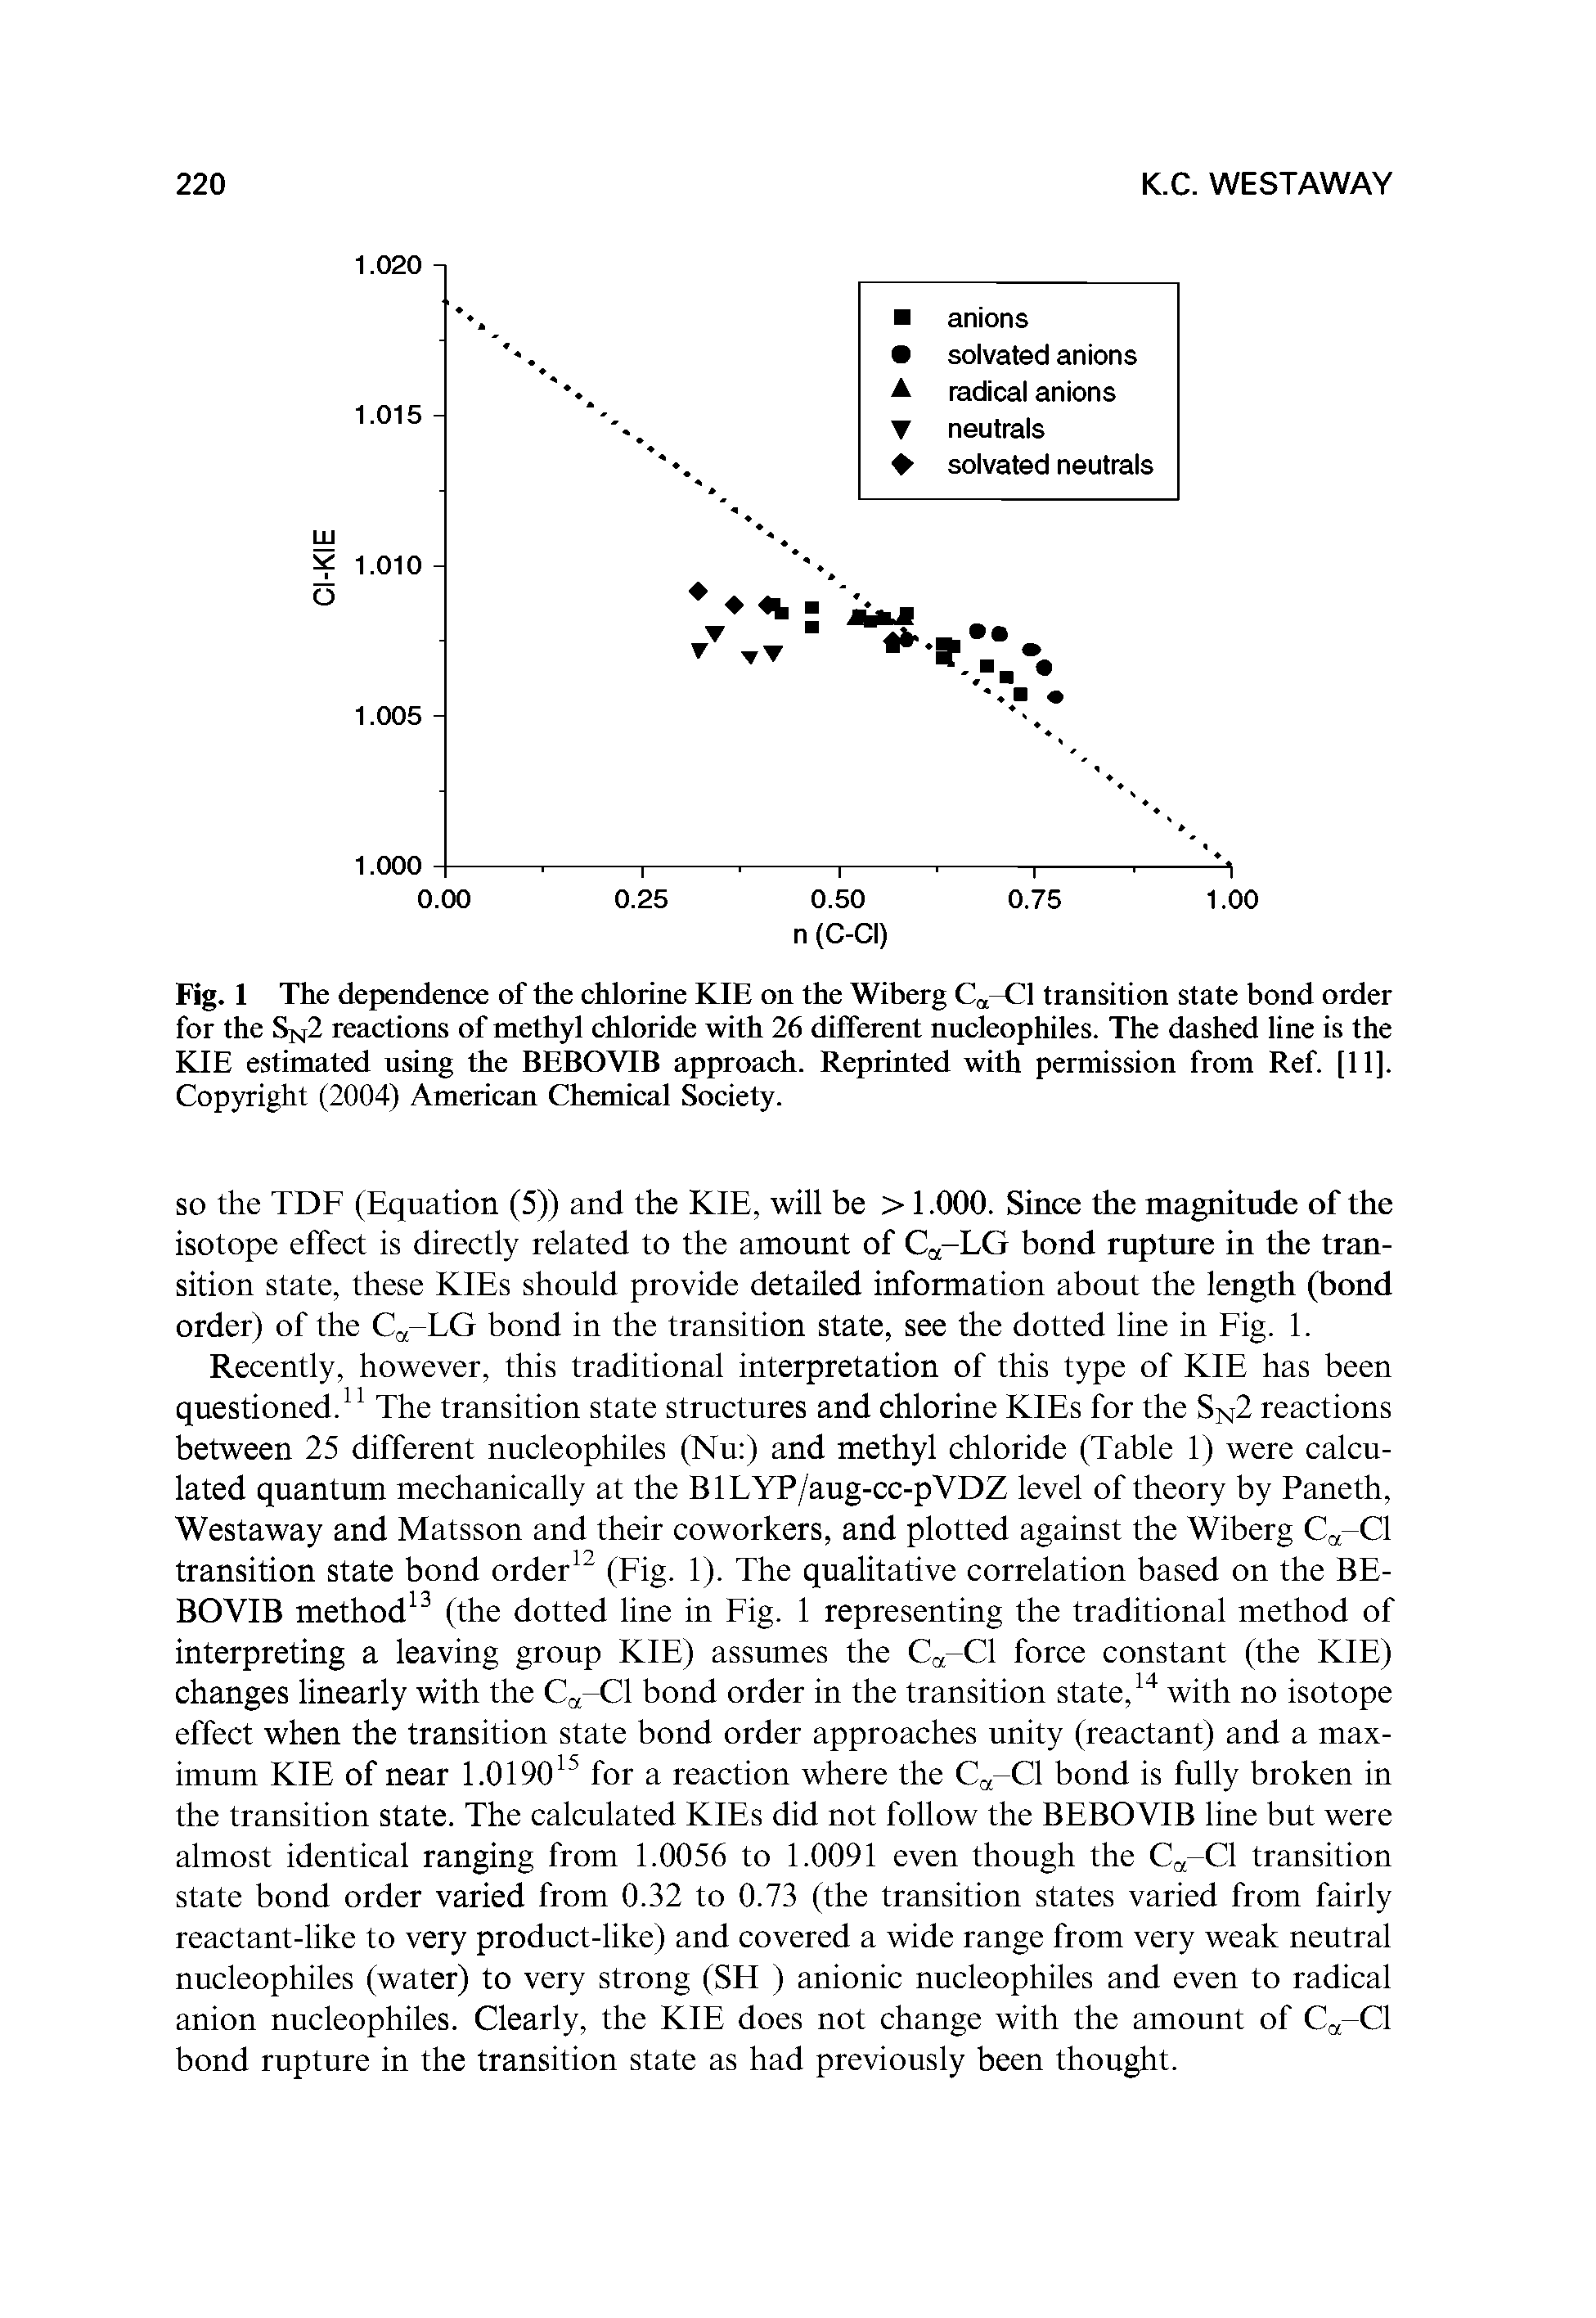 Fig. 1 The dependence of the chlorine KIE on the Wiberg Ca-Cl transition state bond order for the Sn2 reactions of methyl chloride with 26 different nucleophiles. The dashed line is the KIE estimated using the BEBOYIB approach. Reprinted with permission from Ref. [11]. Copyright (2004) American Chemical Society.